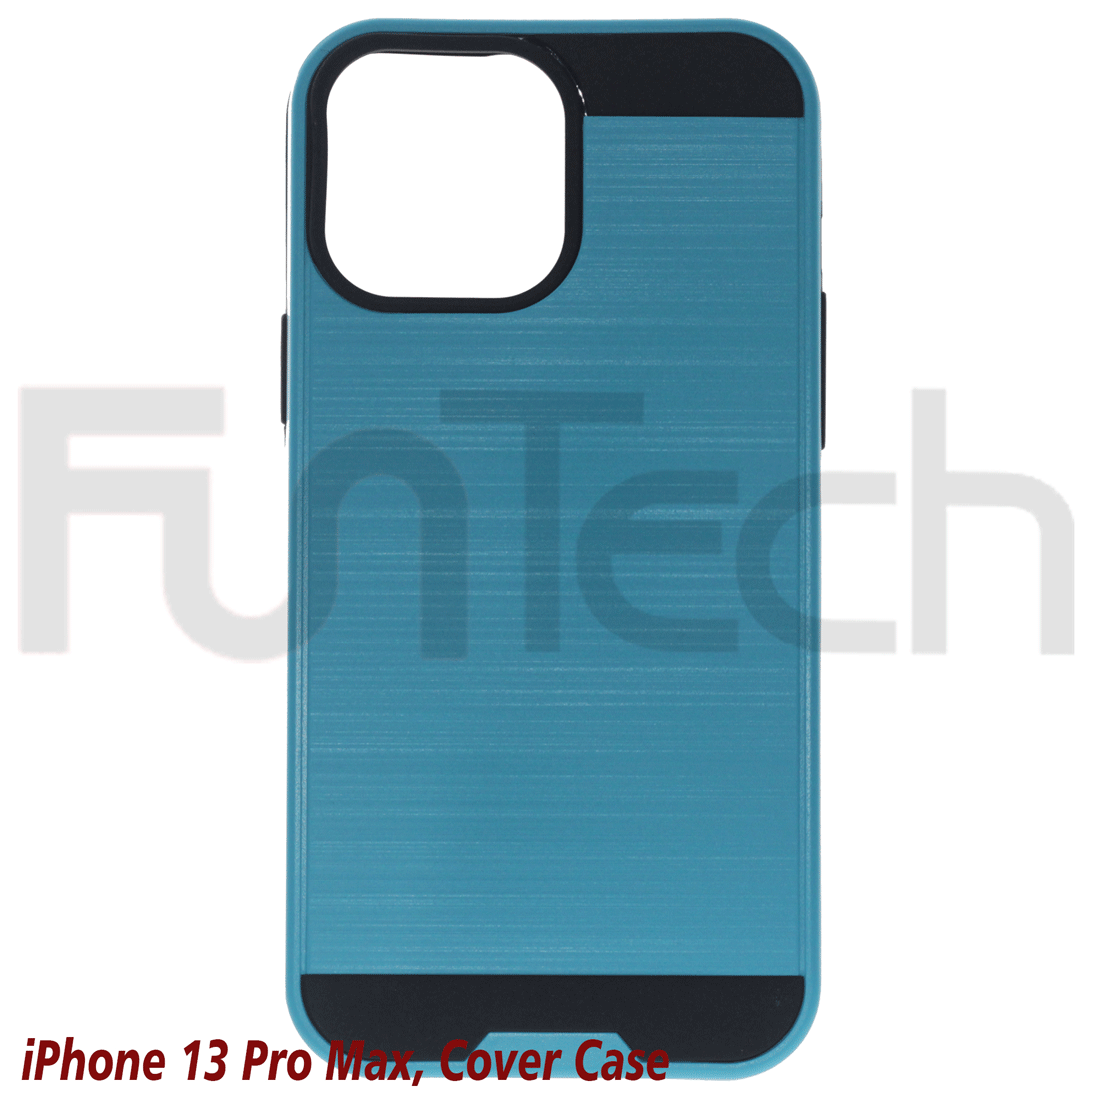 Apple iPhone 13 Pro Max, Slim Armor Case, Color Teal.